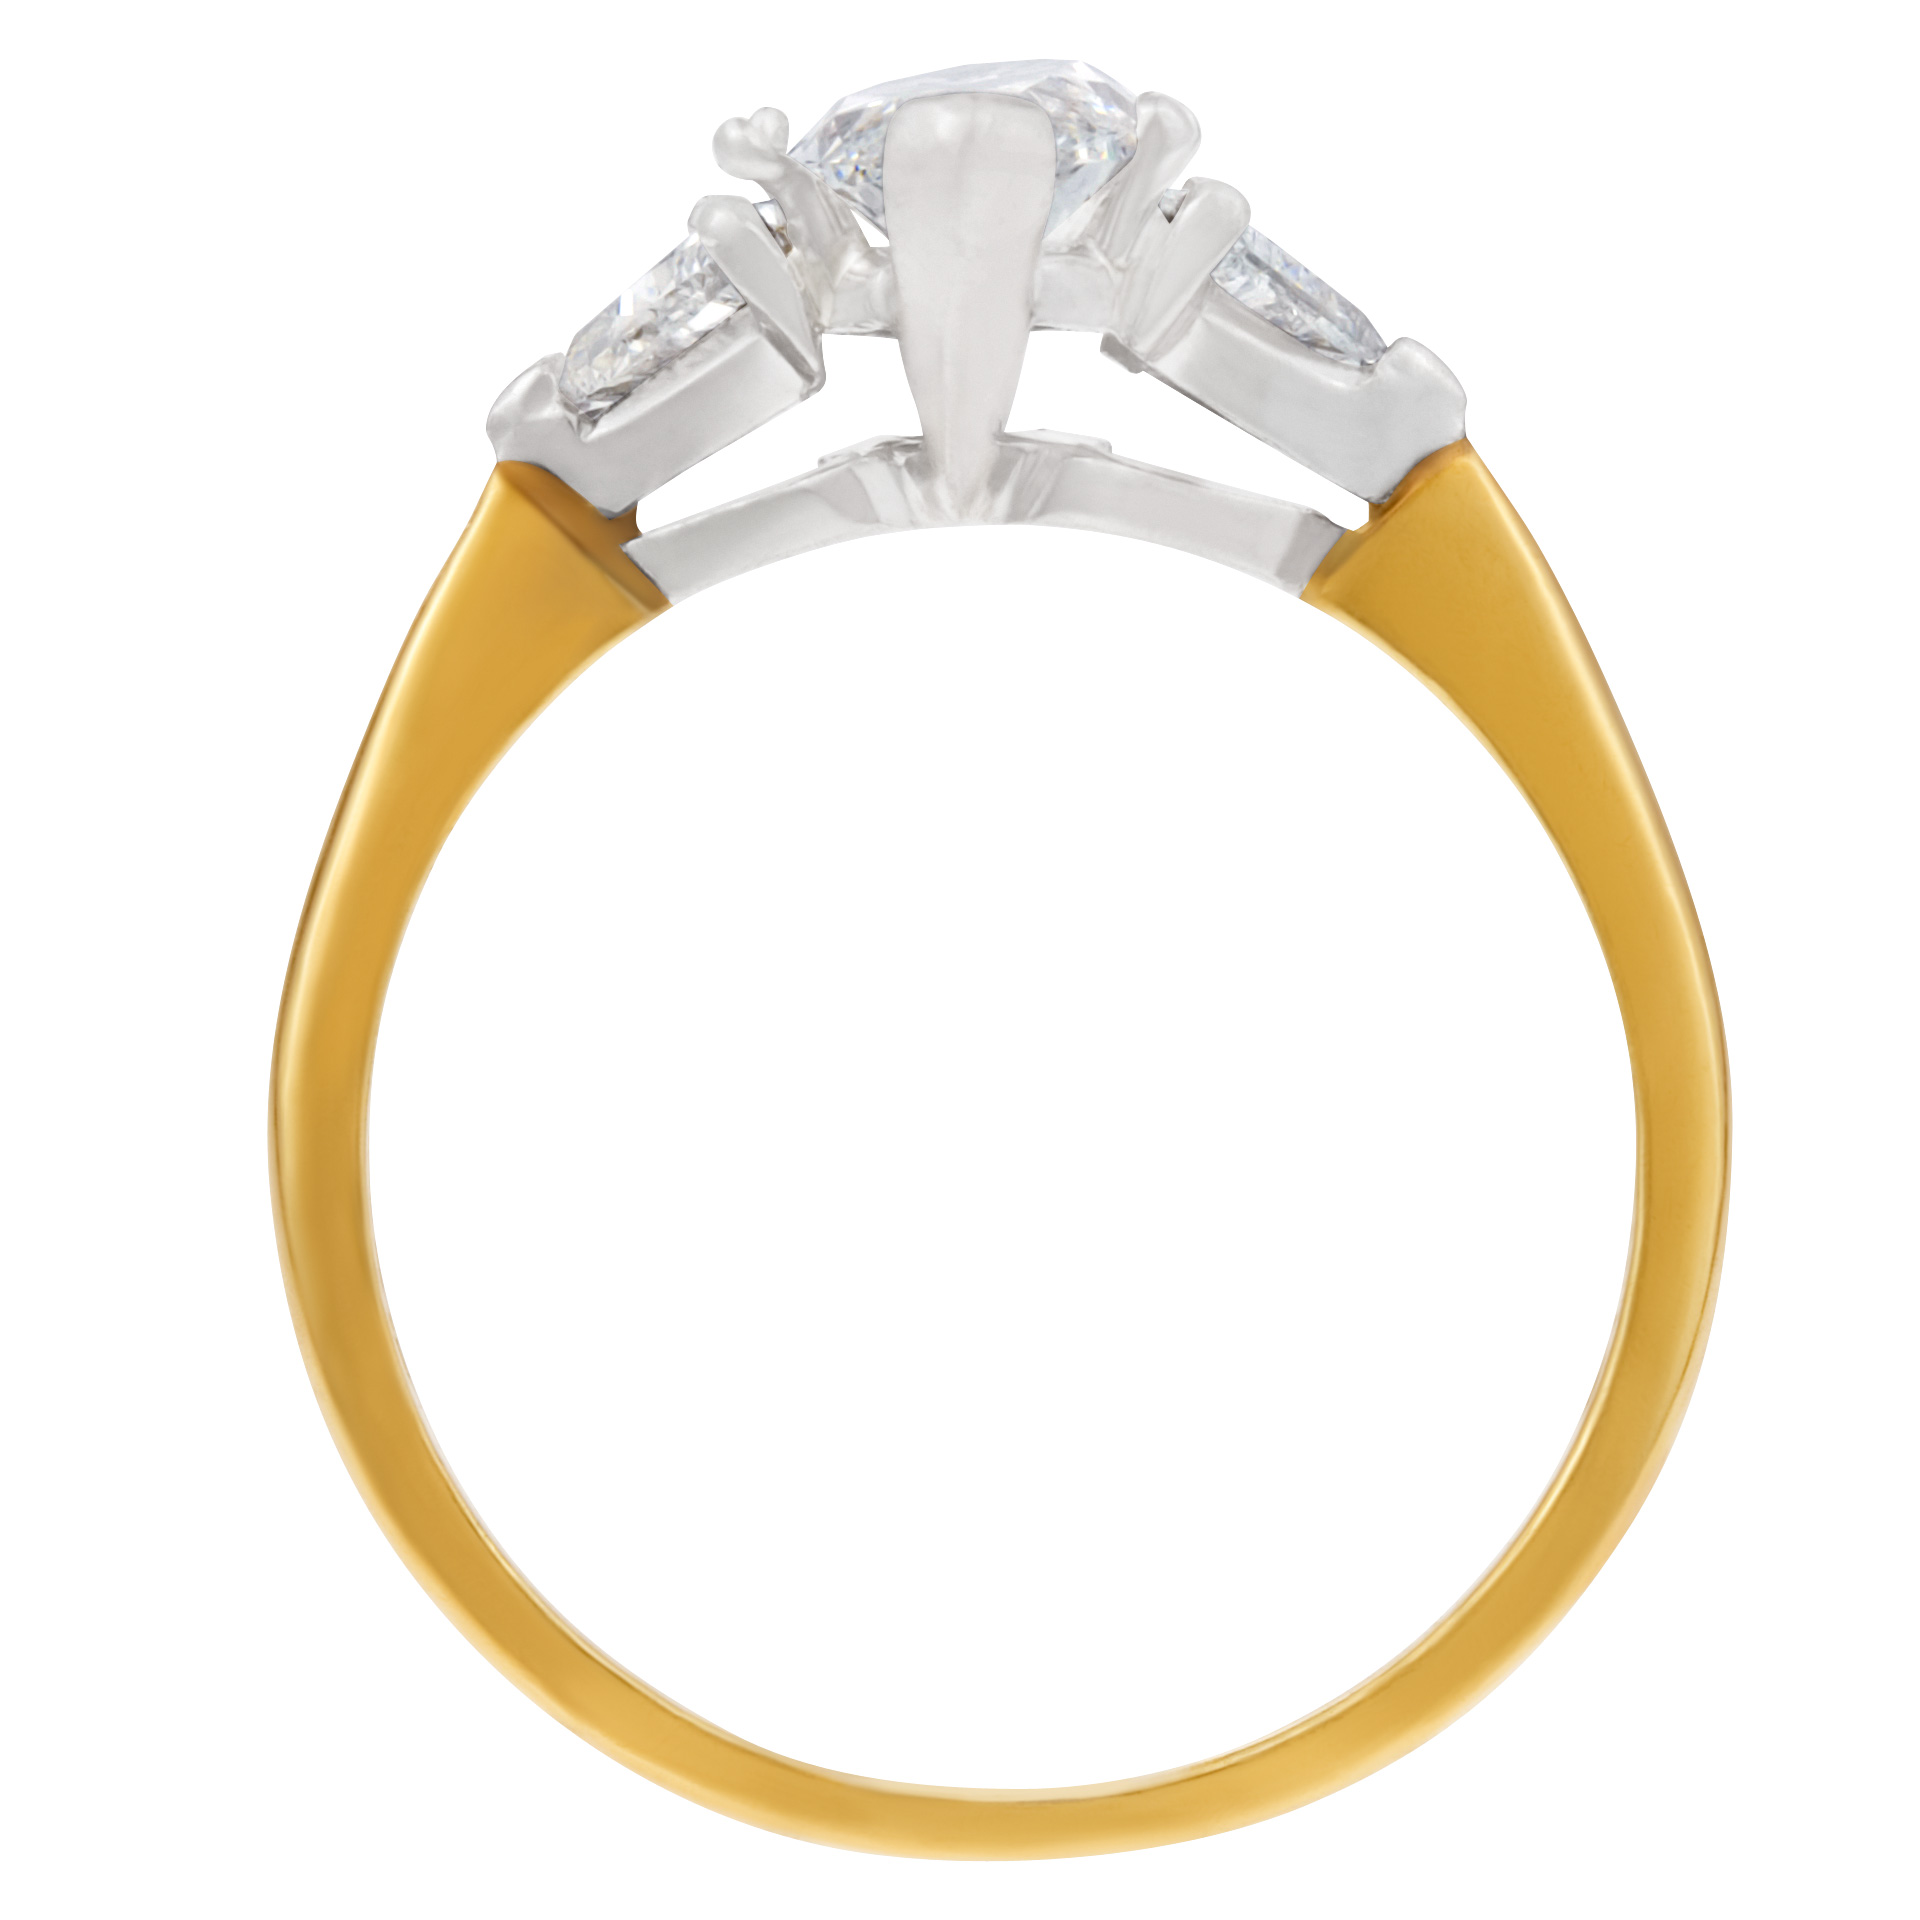 GIA Certified Diamond 1.30 cts (H color, SI2 clarity) ring set in 18k yellow gold. image 2